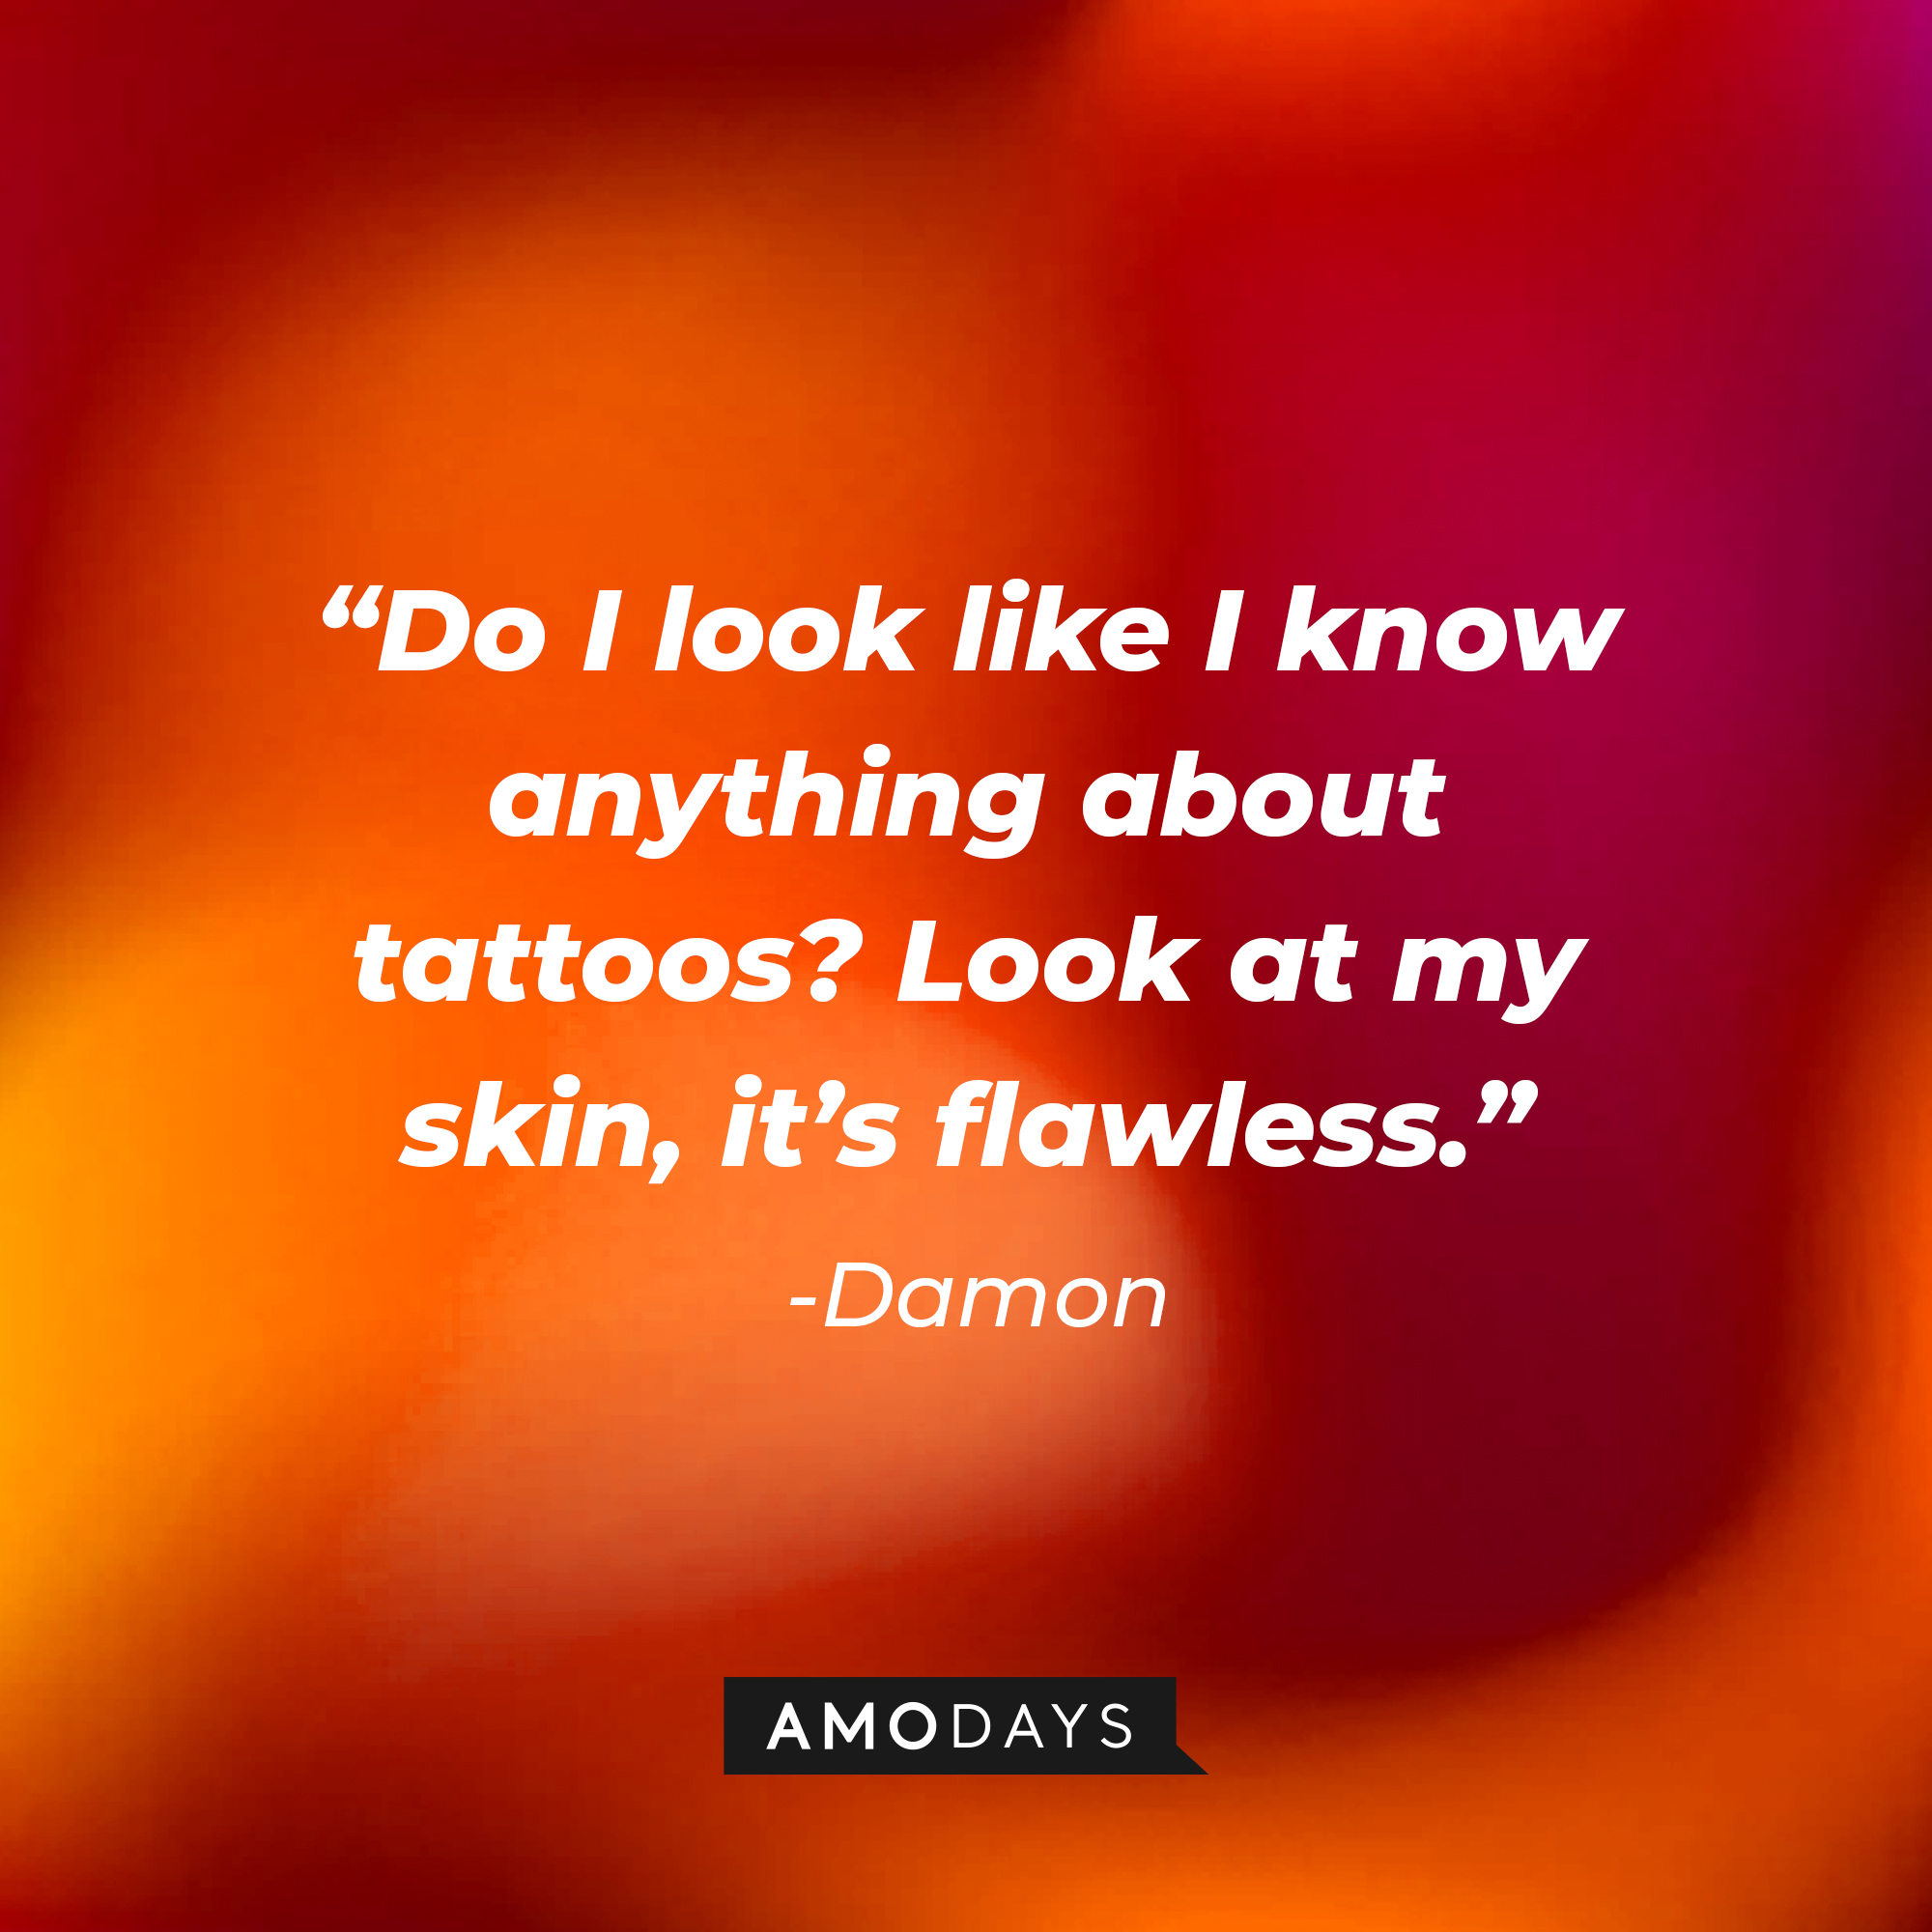 Damon's quote: "Do I look like I know anything about tatoos? Look at my skin, it's flawless." | Source: Amodays